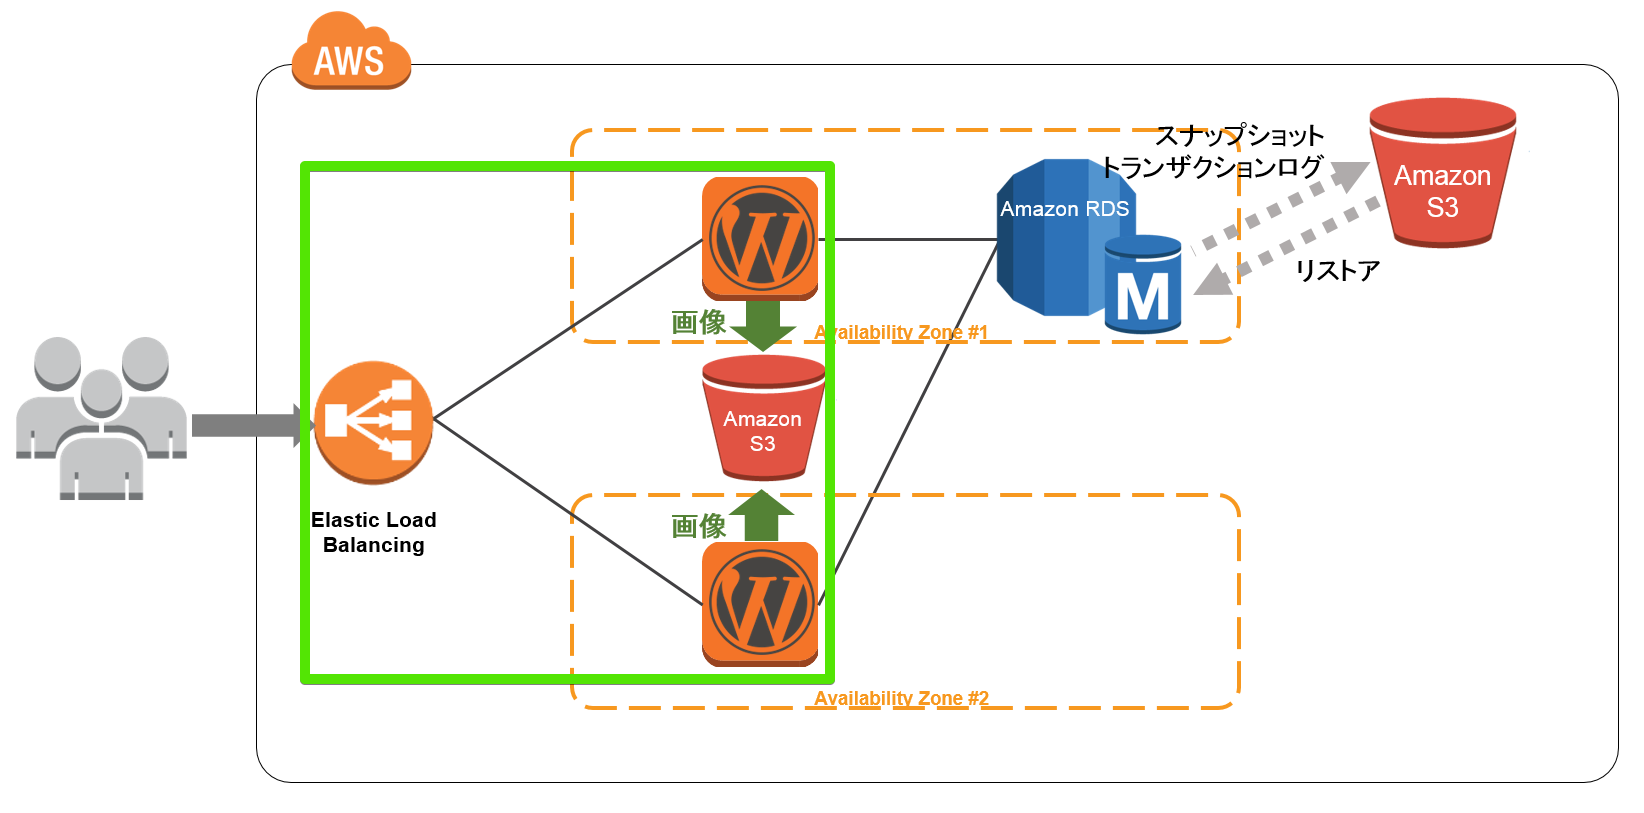 EC2-RDSアーキ図 - PowerPoint 2016-05-30 18.03.22.png